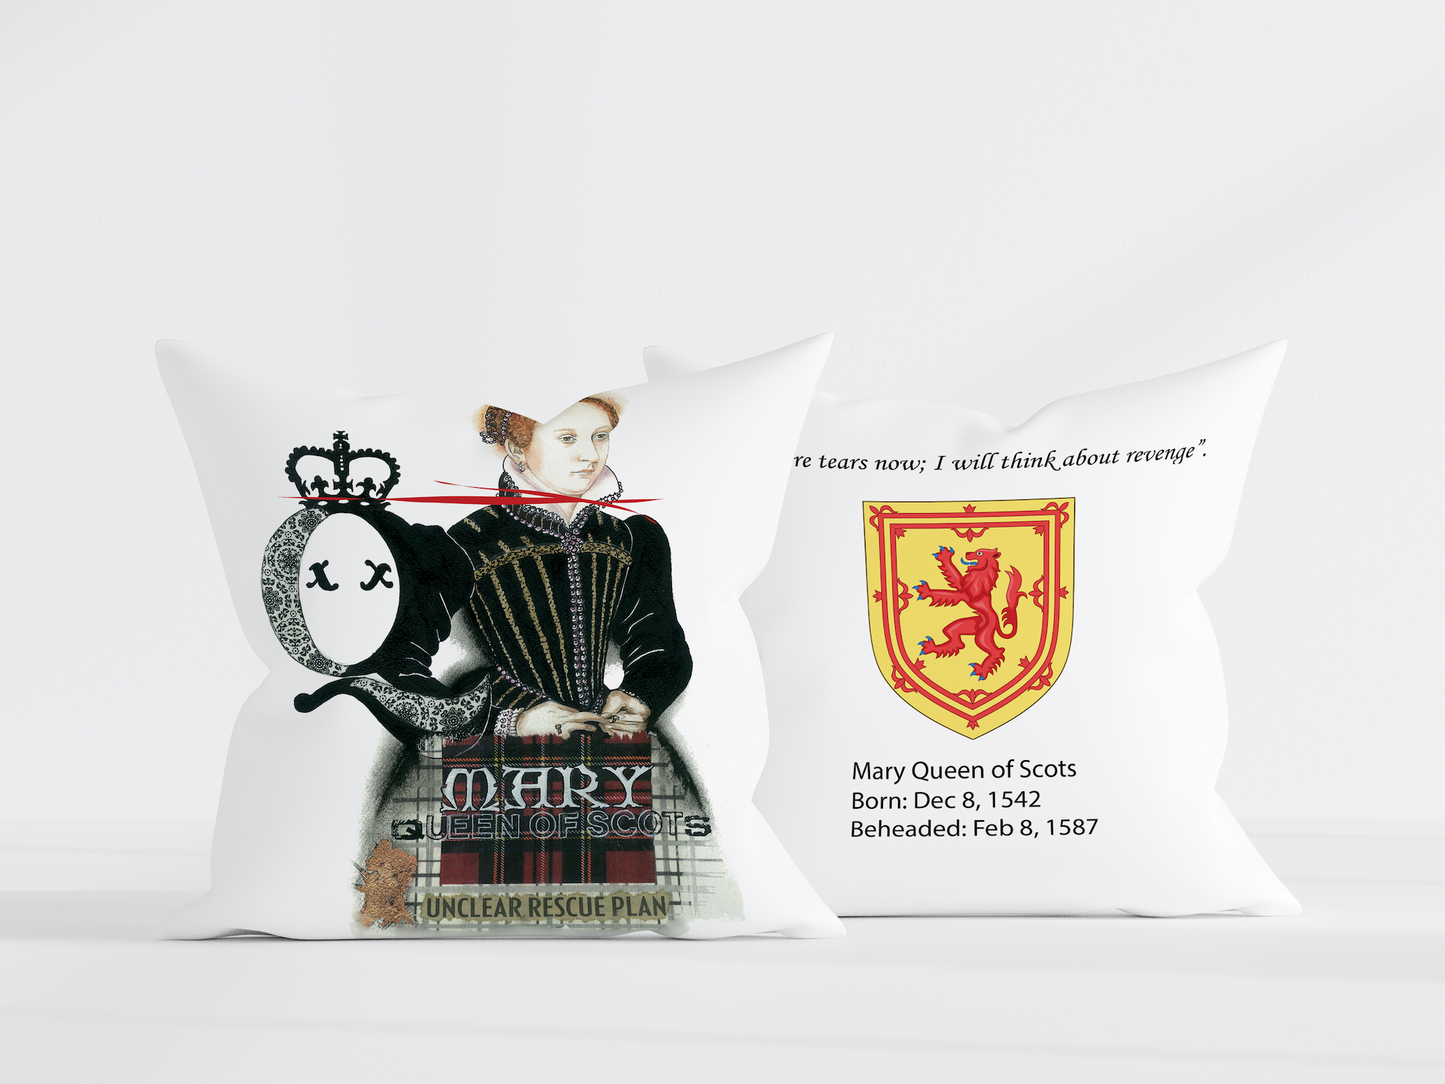 Mary Queen of Scots Pillow 22x22